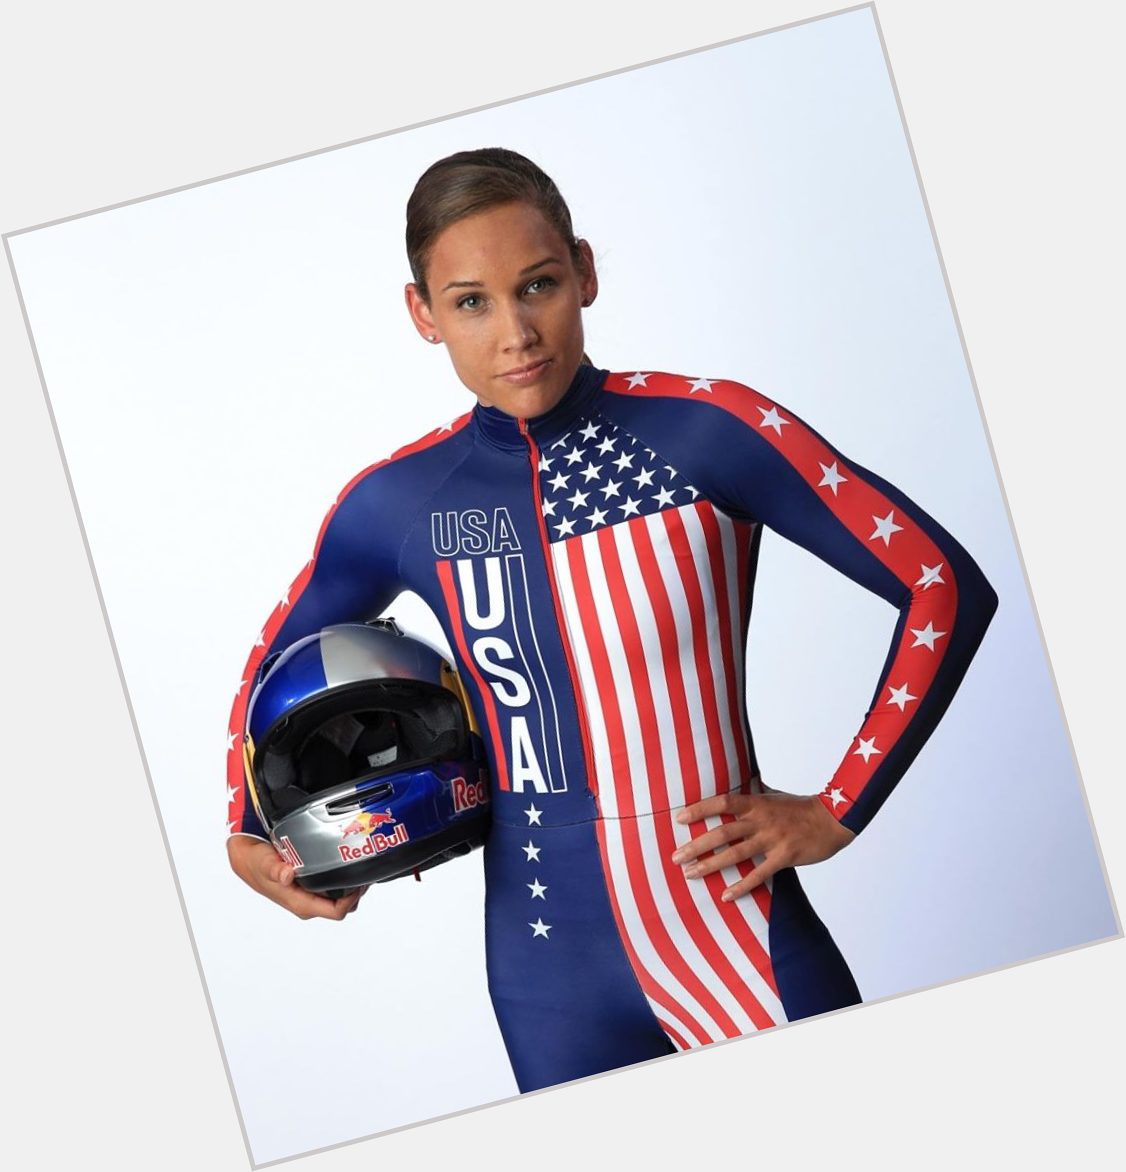 Happy Birthday to Track and Field and Bobsled Star Lolo Jones who turns 37 today! 